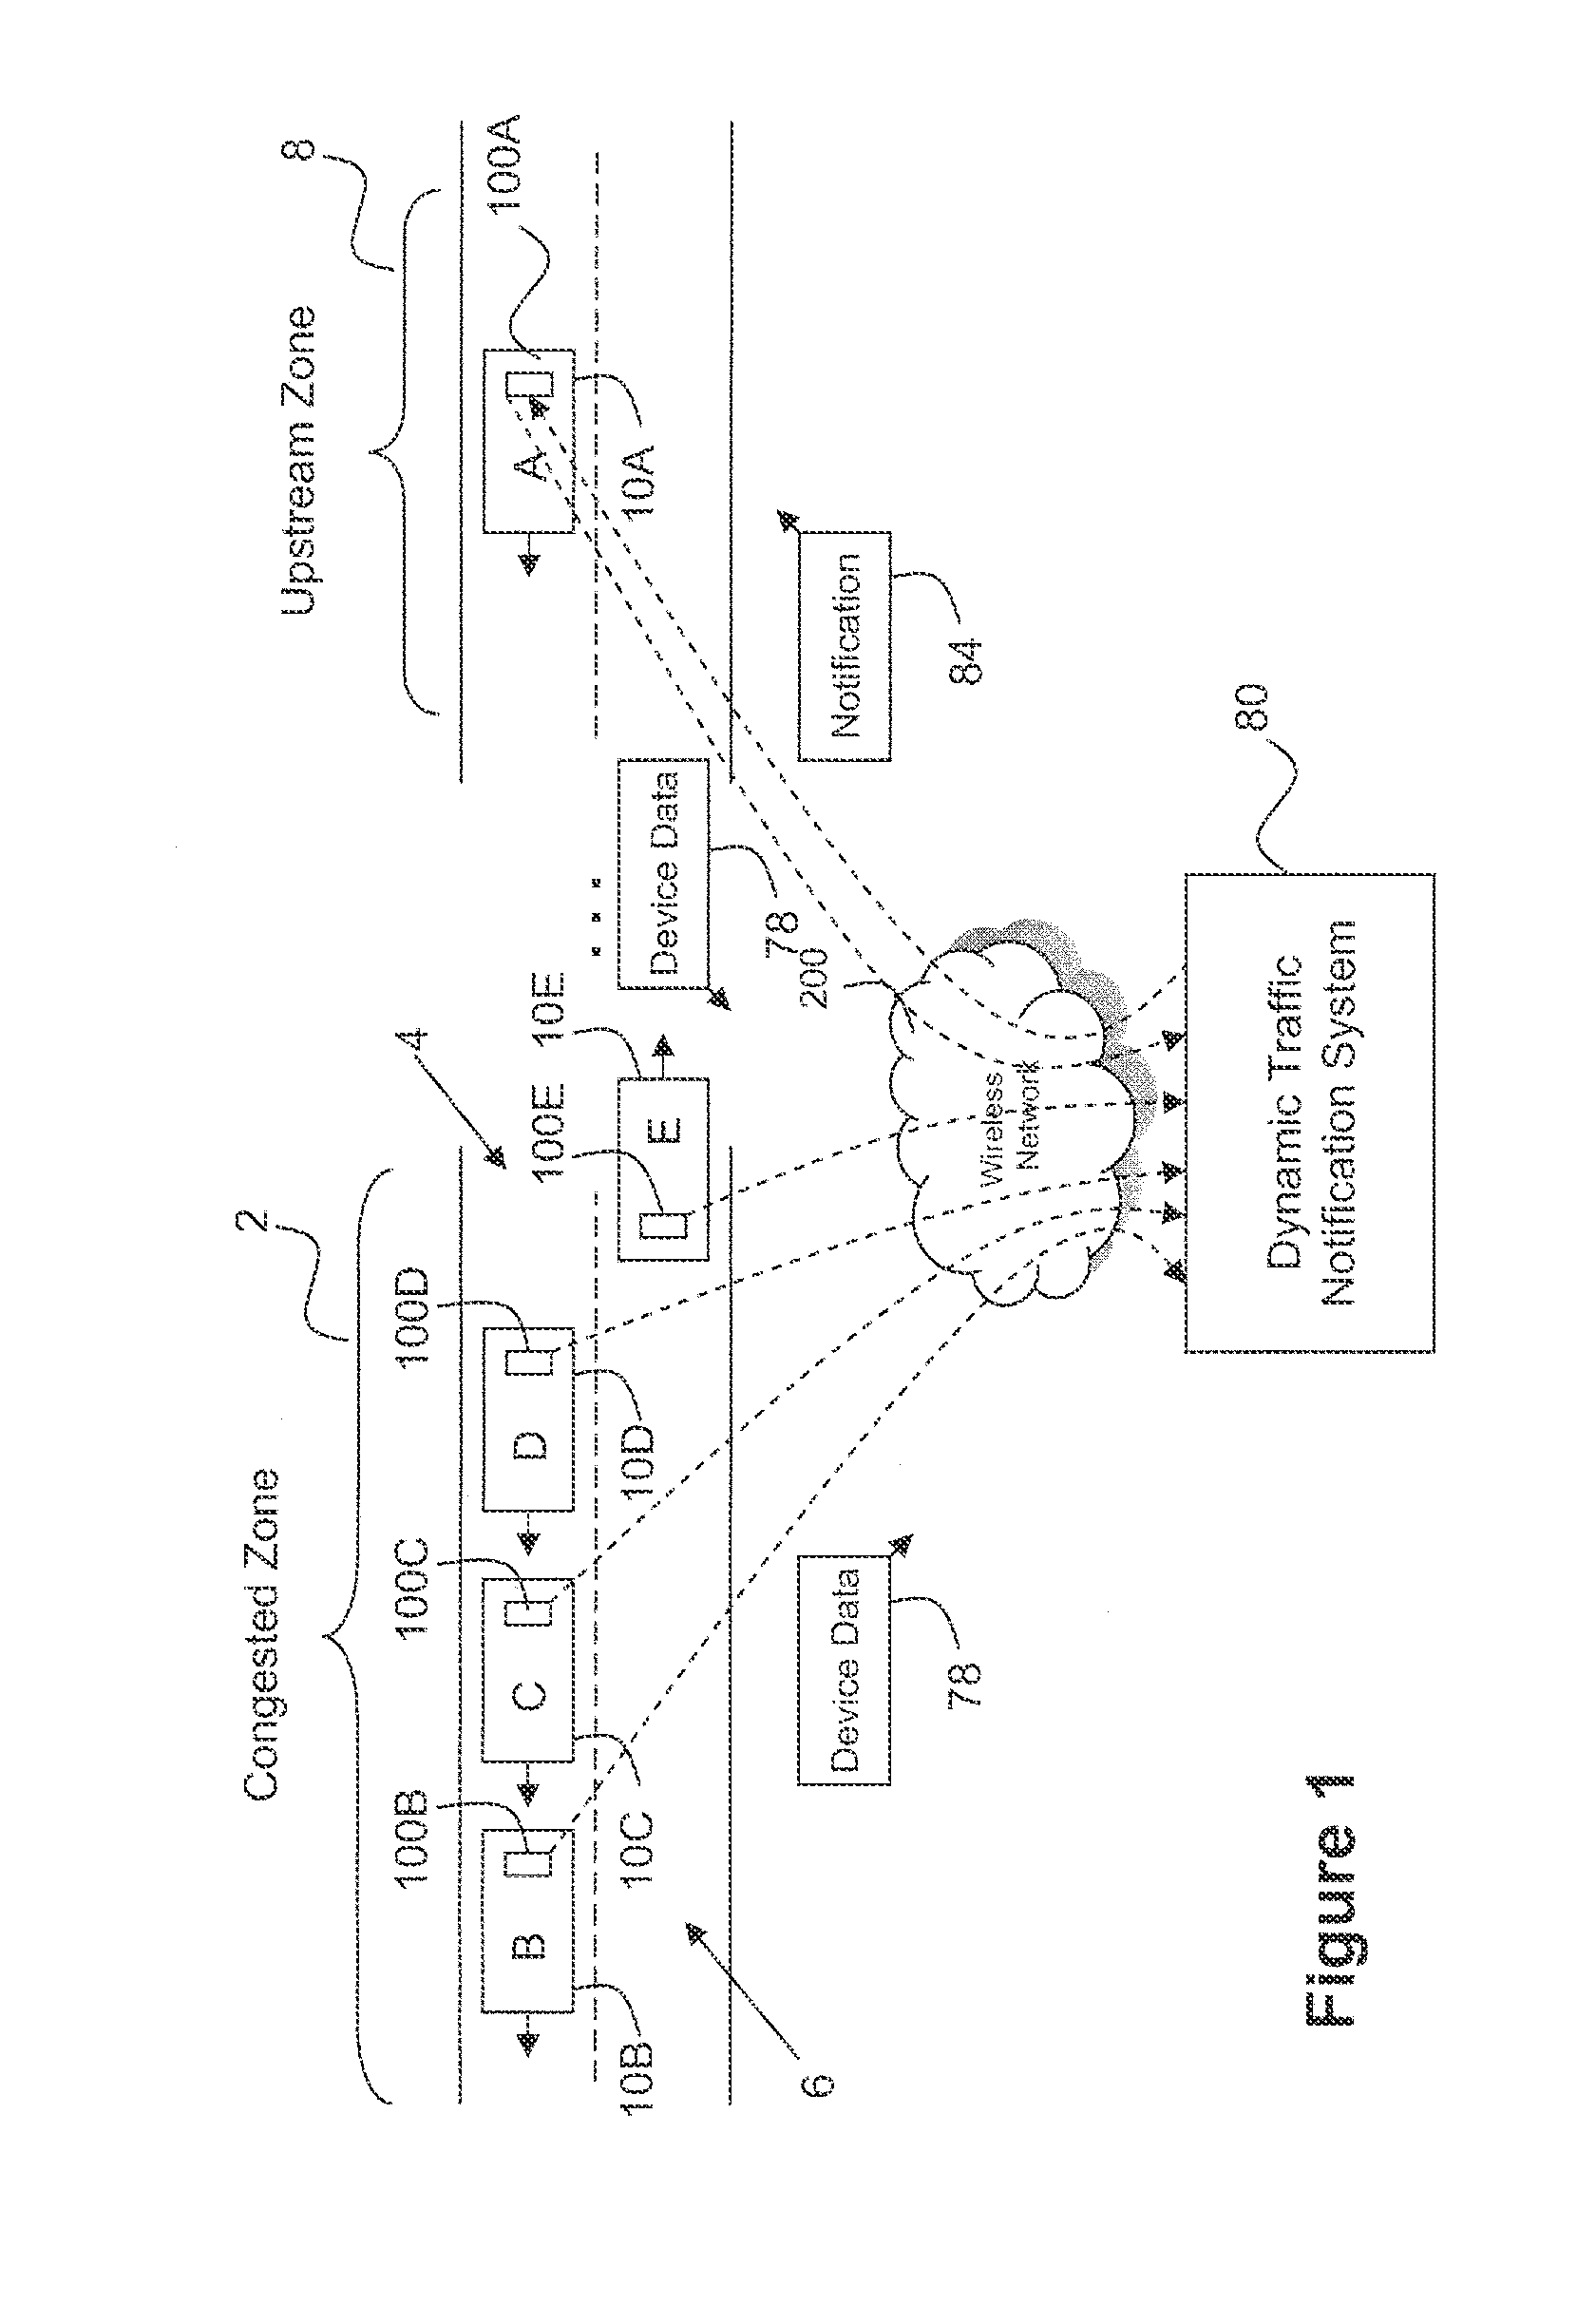 System and method for faster detection of traffic jams